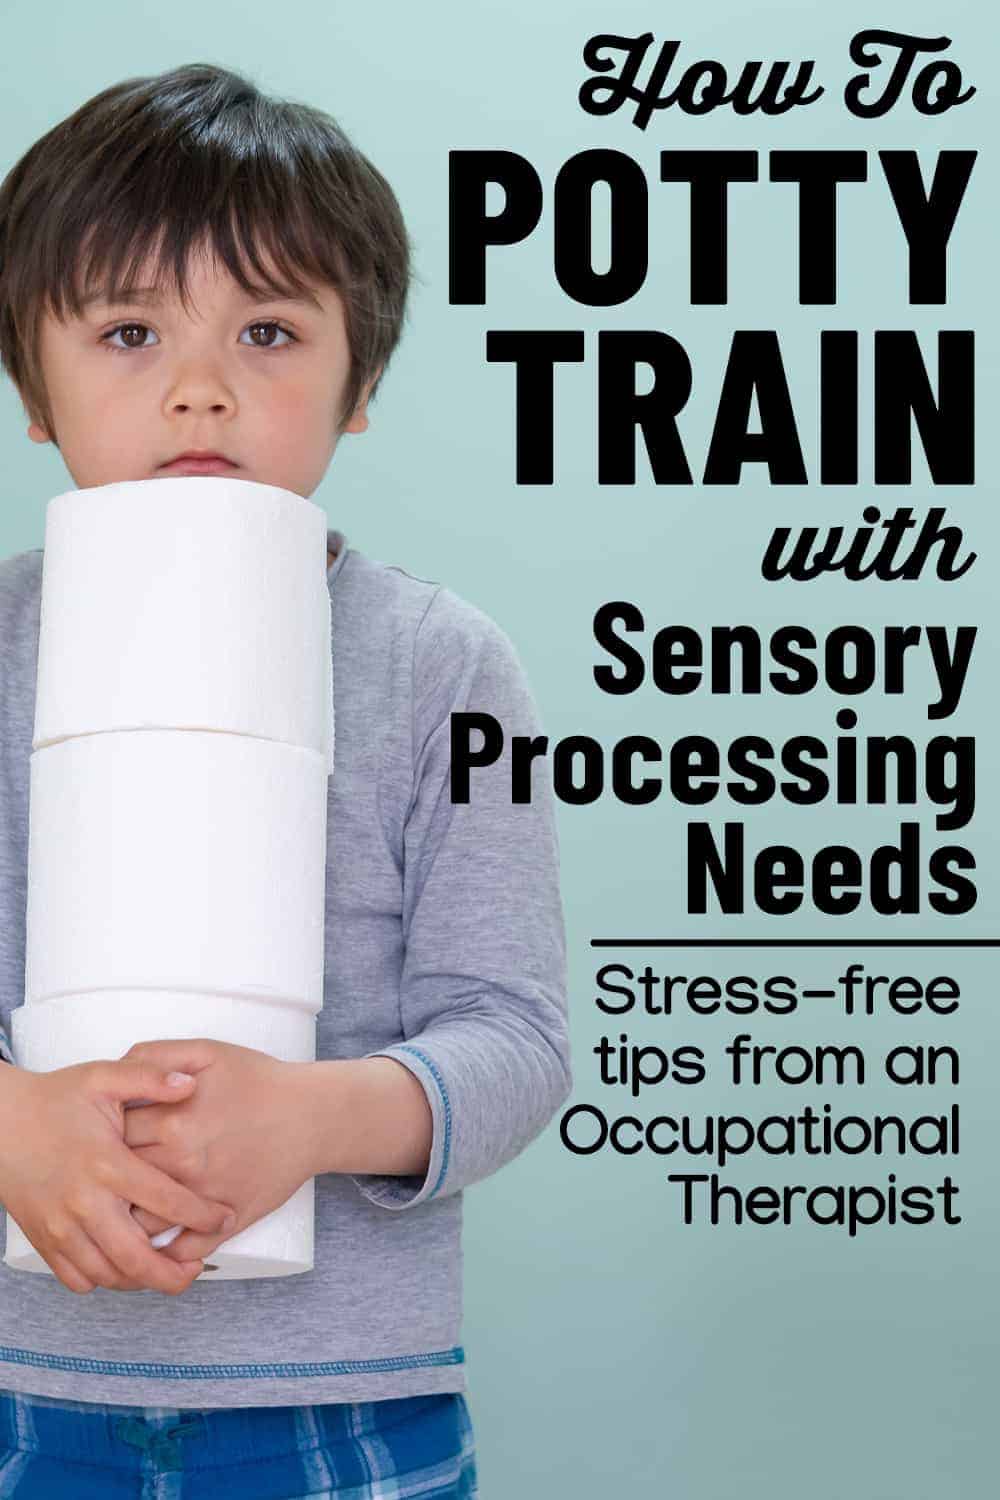 The best strategies for potty training and toilet problems for kids with sensory issues, SPD, ADHD, and ASD. Help for refusing to go, withholding, frequent accidents and more!